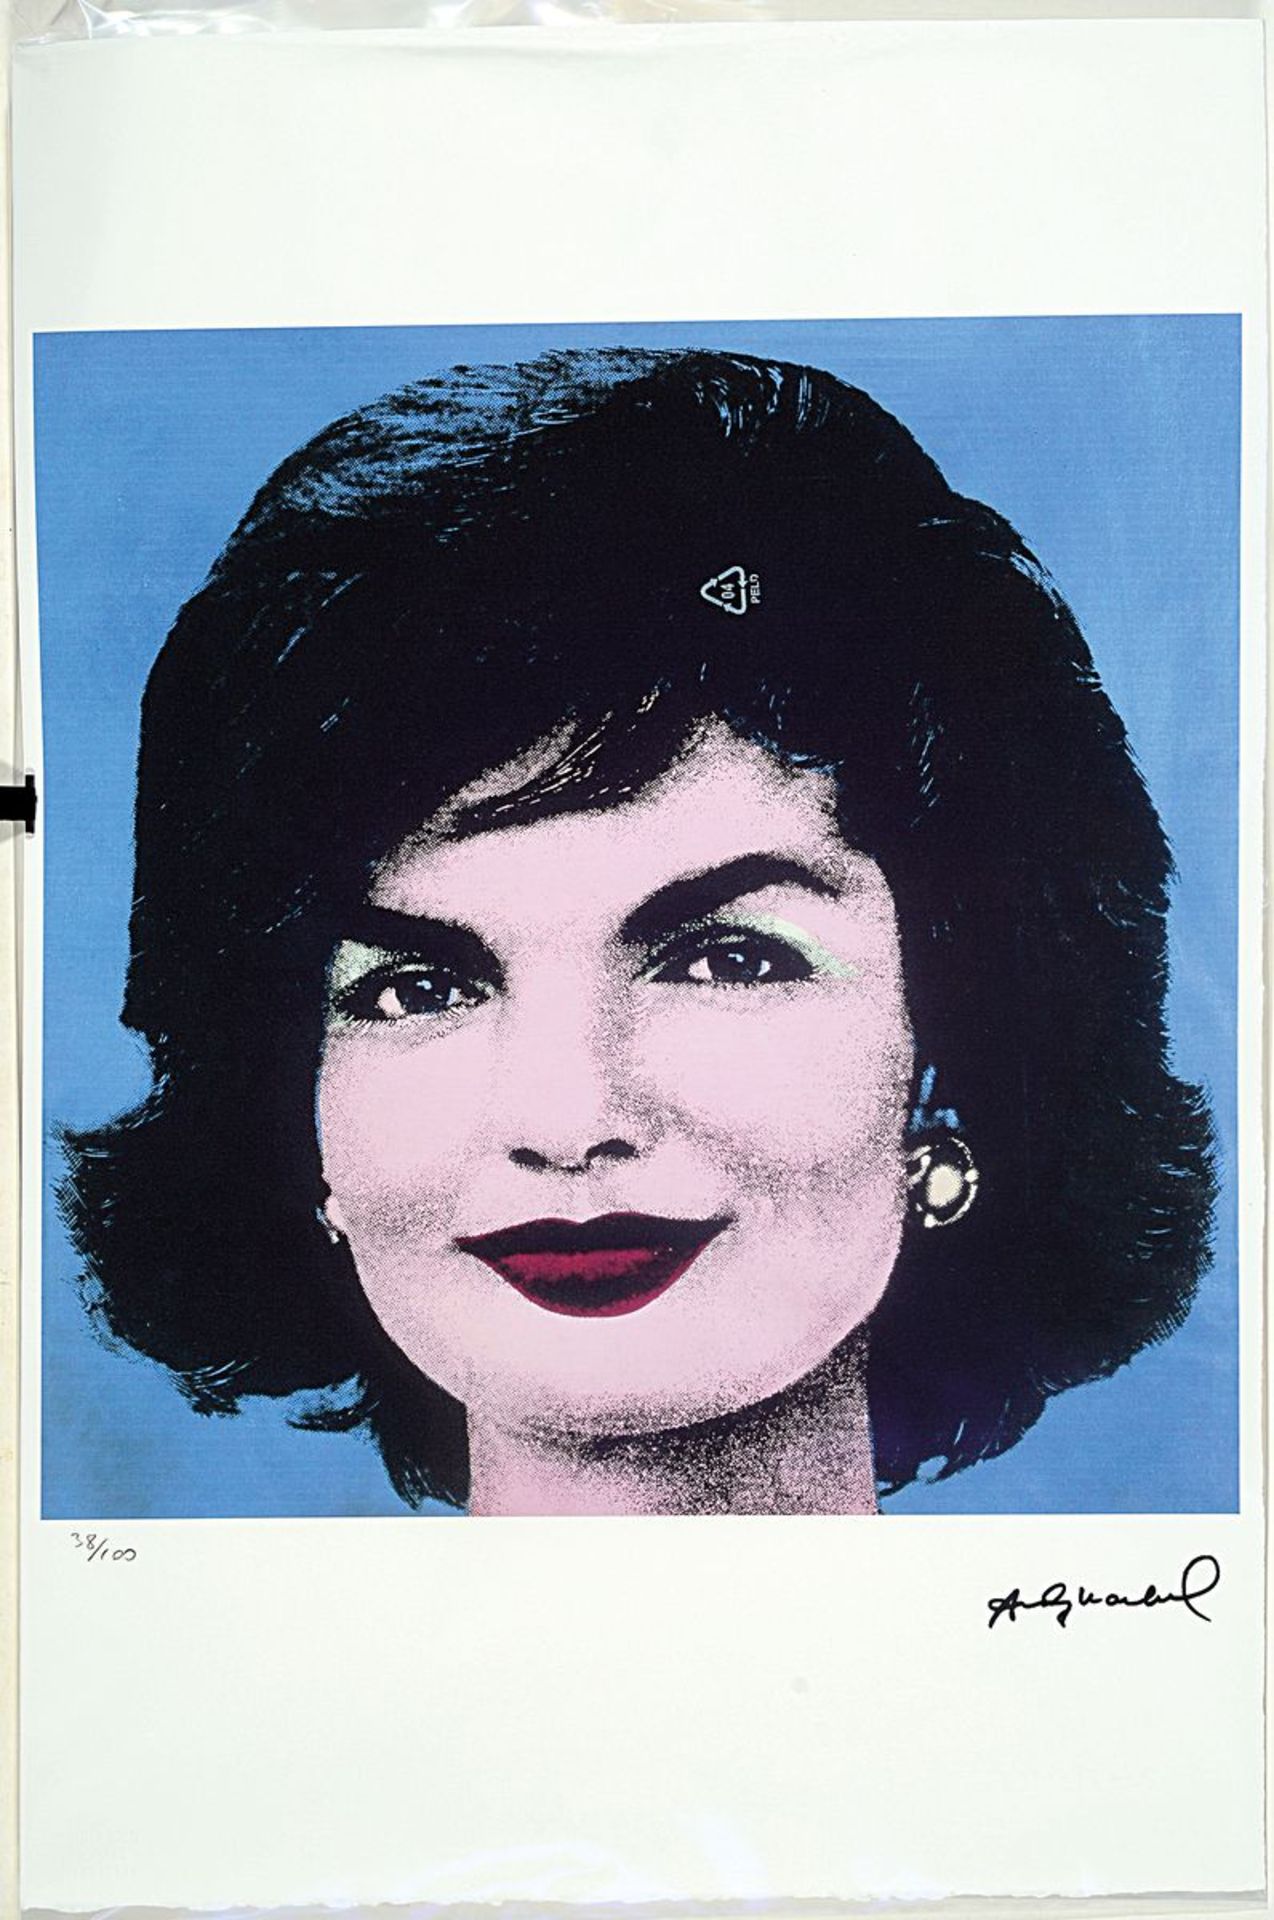 Nach Andy Warhol (1928-1987), Lithographie, 'Jackie